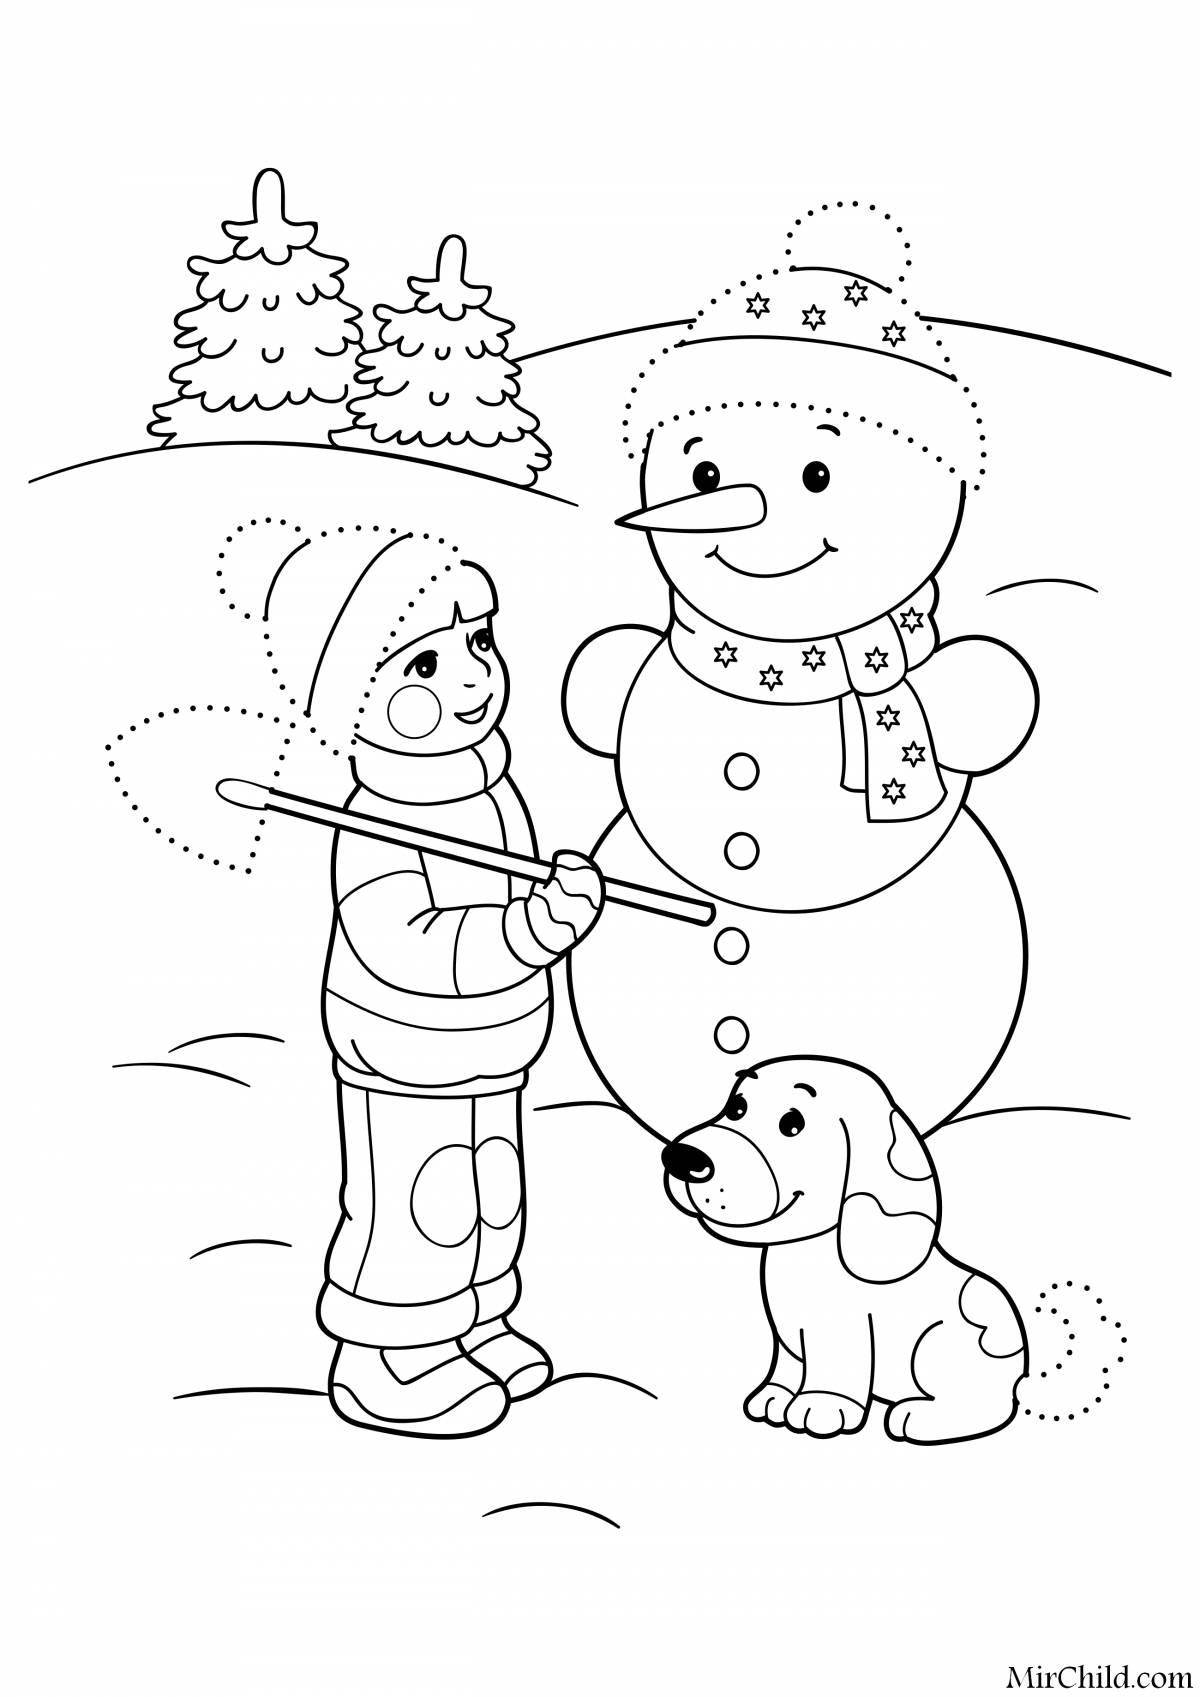 Funny snowman coloring book for kids 4-5 years old